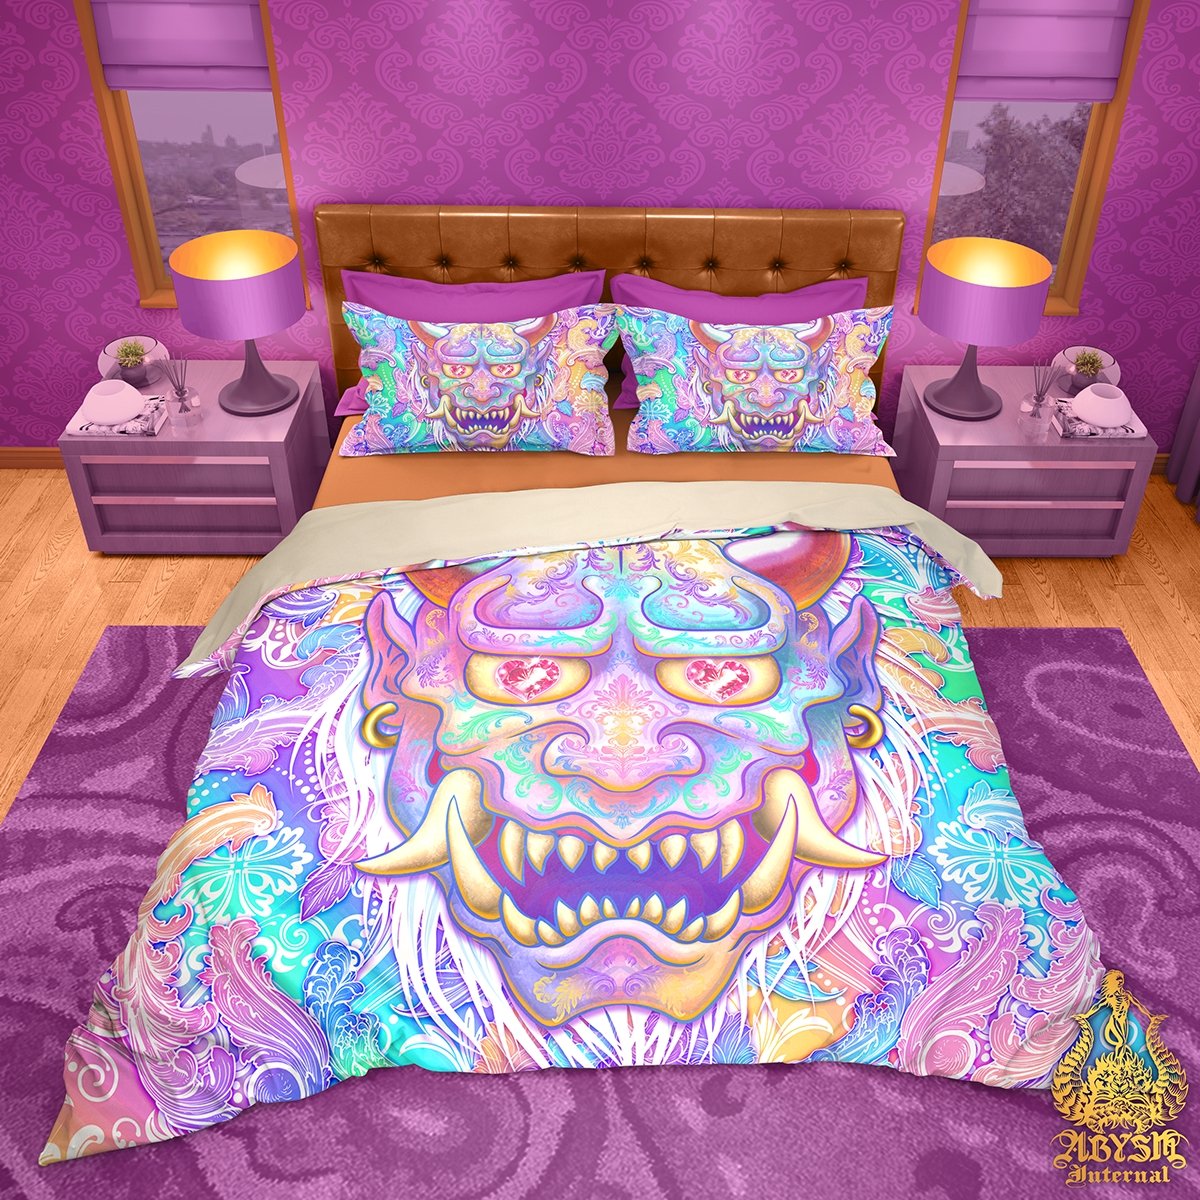 Oni Bedding Set, Comforter and Duvet, Aesthetic Bed Cover, Kawaii Gamer Bedroom Decor Bedroom, Indie Room, King, Queen and Twin Size - Pastel Japanese Demon, - Abysm Internal